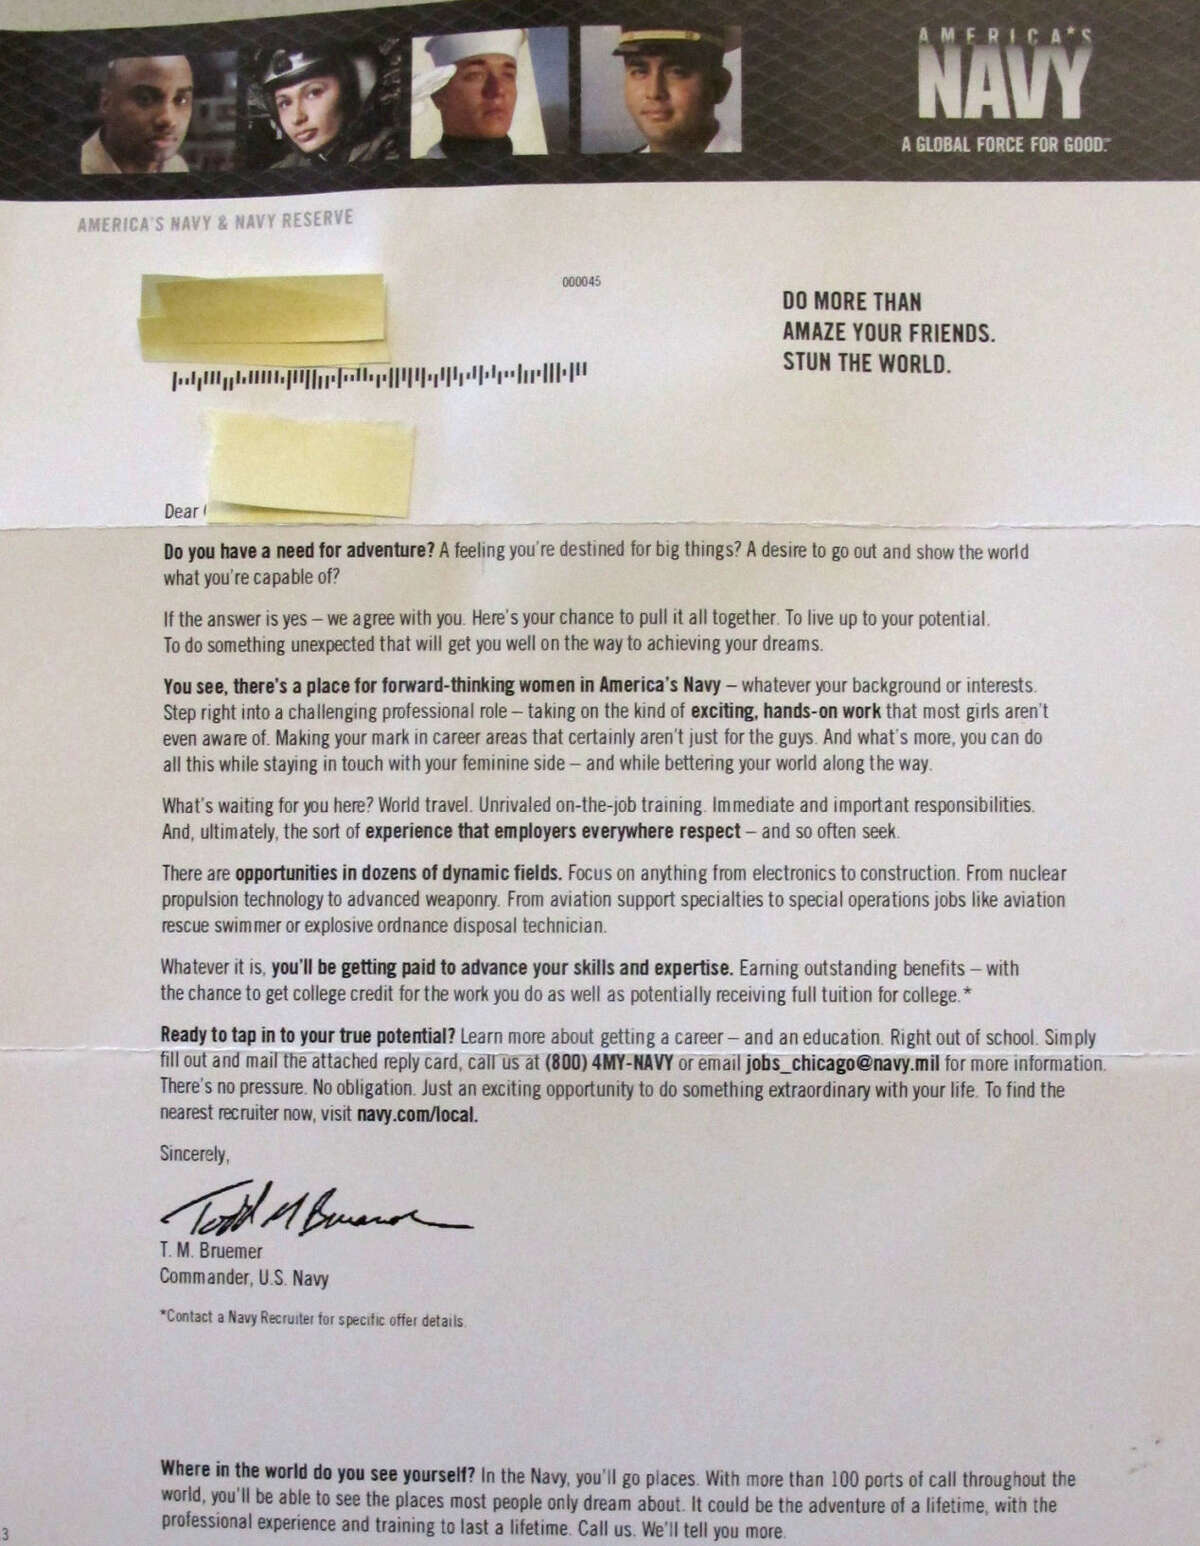 This April 19, 2016 photo shows a recruiting mailer from the U.S. Navy to potential female recruits that the Navy has scrapped. It promised women they could join while staying in touch with their feminine side. Navy officials said Tuesday April 19, 2016, they made the decision amid criticism that the wording was condescending and perpetuated stereotypes. The mailer says the Navy offers women opportunities "most girls aren't even aware of" in career areas that "aren't just for the guys... all while staying in touch with your feminine side." (AP Photo/Stott Bauer)